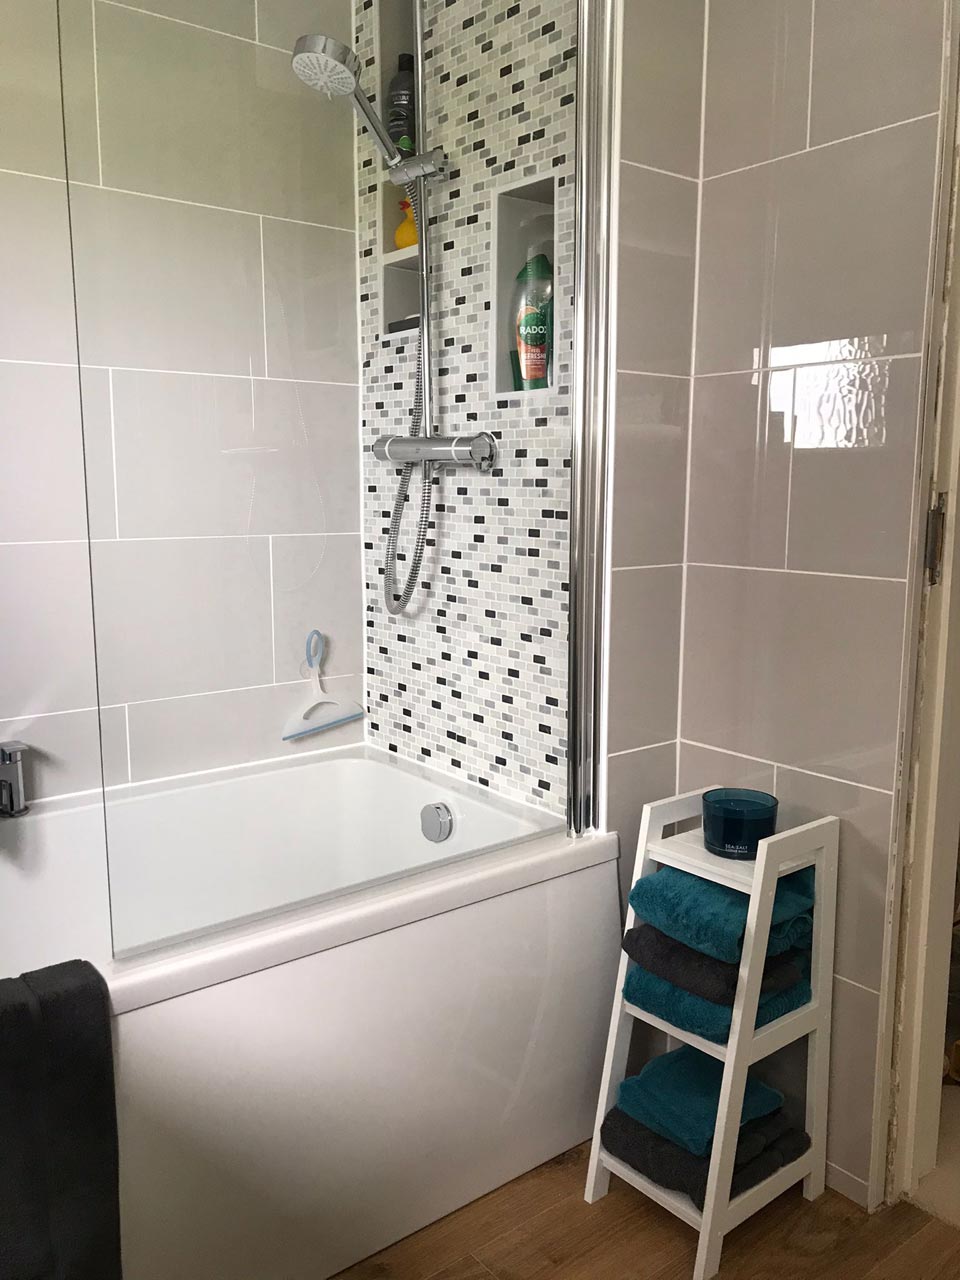 New Bathroom Fit Ground Floor Flat in Highcliffe - After - Emerald Builders Ltd Bournemouth Poole Christchurch Dorset